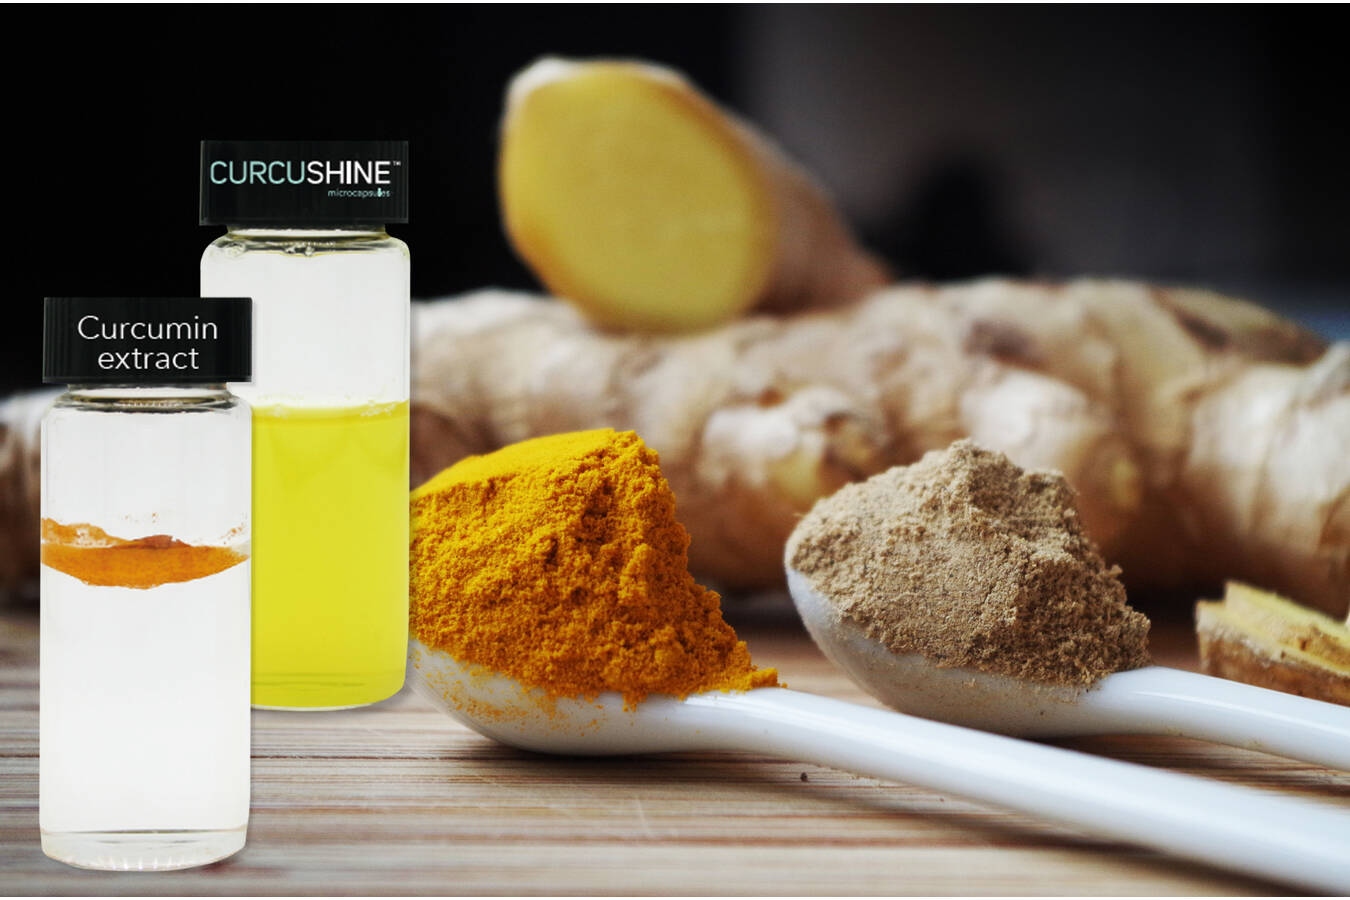 HOW TO TAME RECALCITRANT INGREDIENTS LIKE CURCUMIN